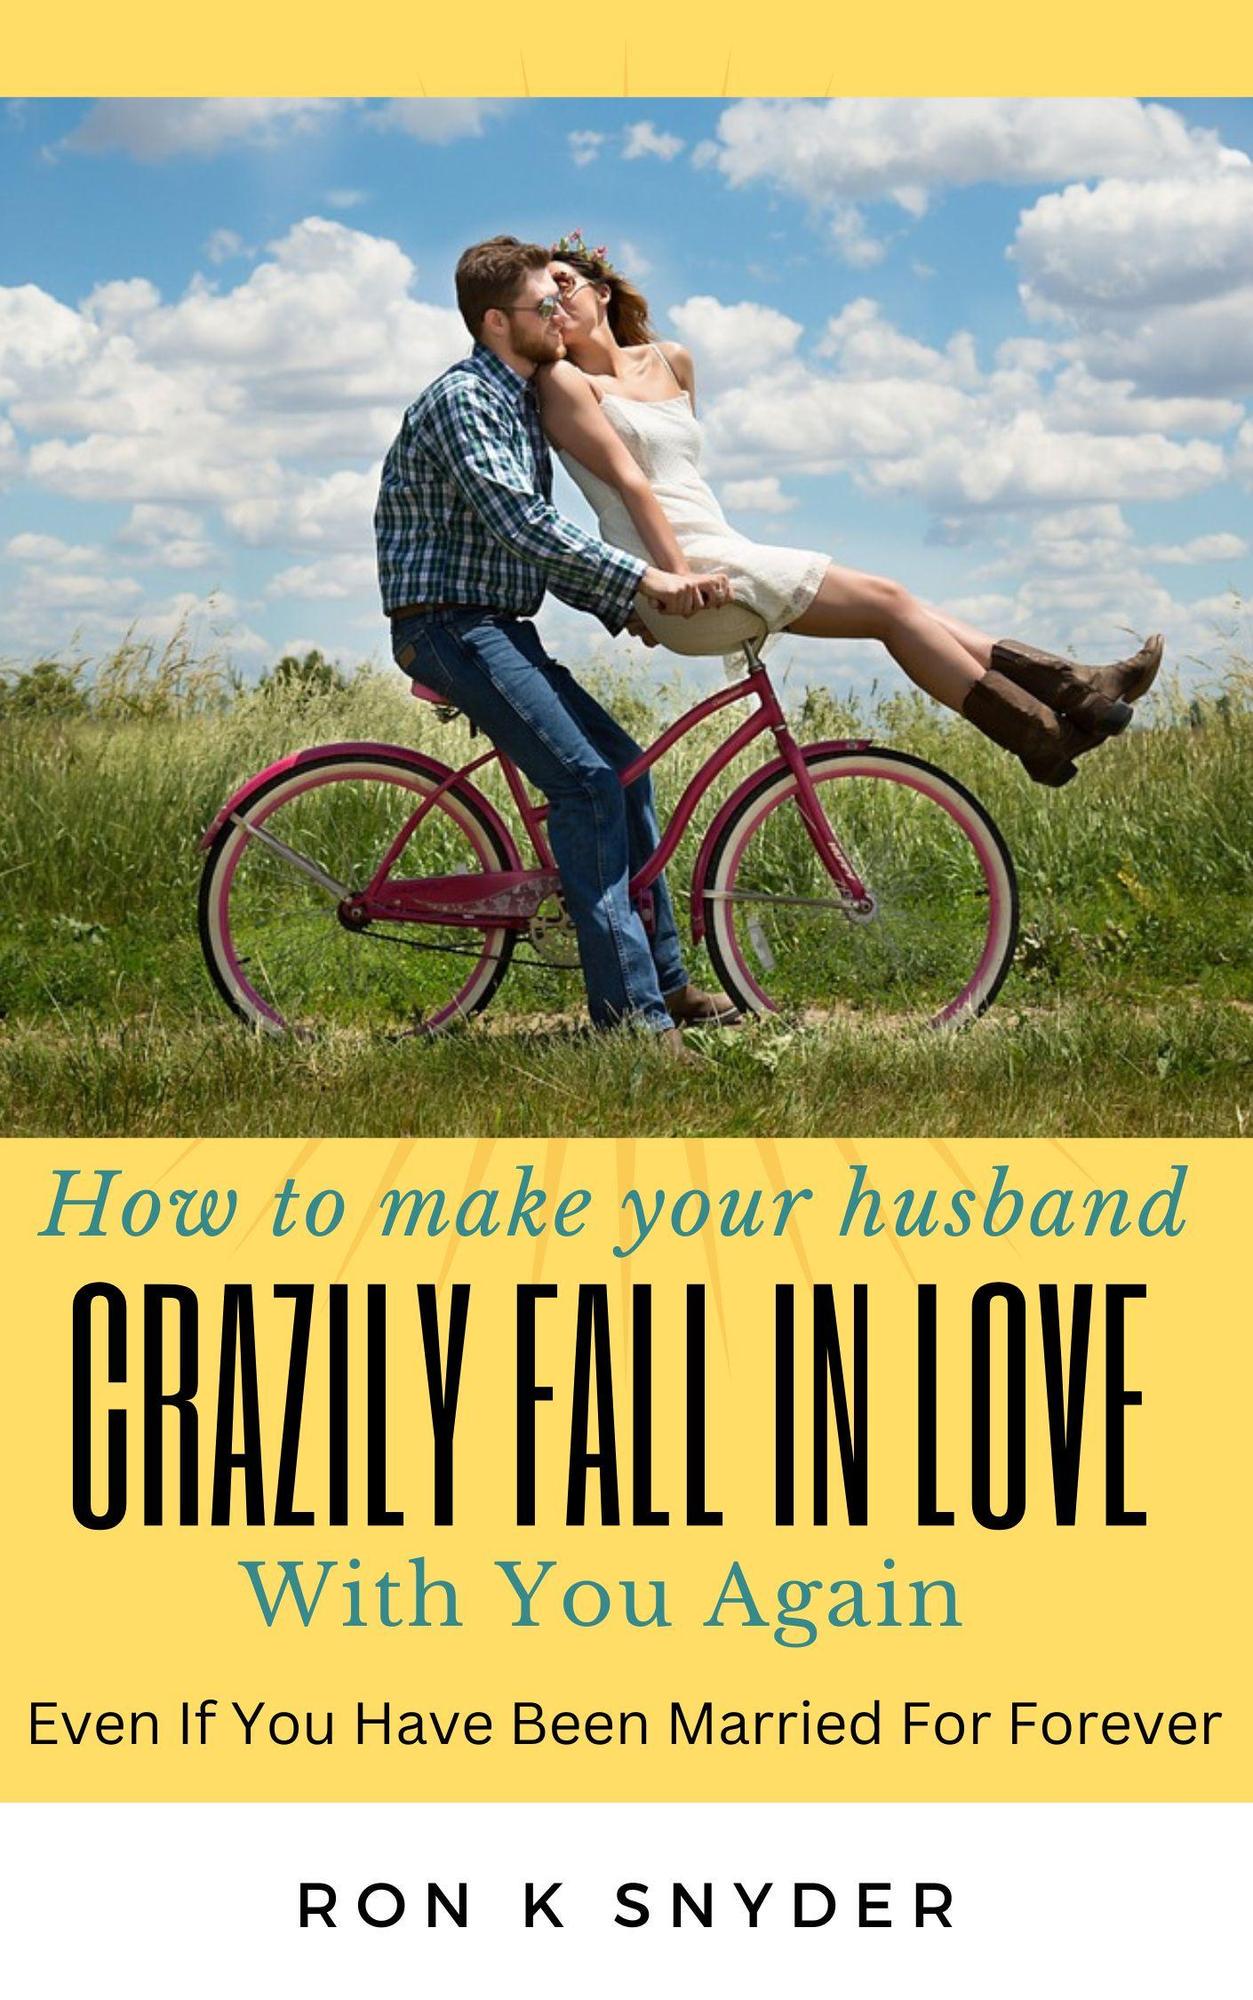 Smashwords How To Make Your Husband Crazily Fall In Love With You Again Even If You Have Been